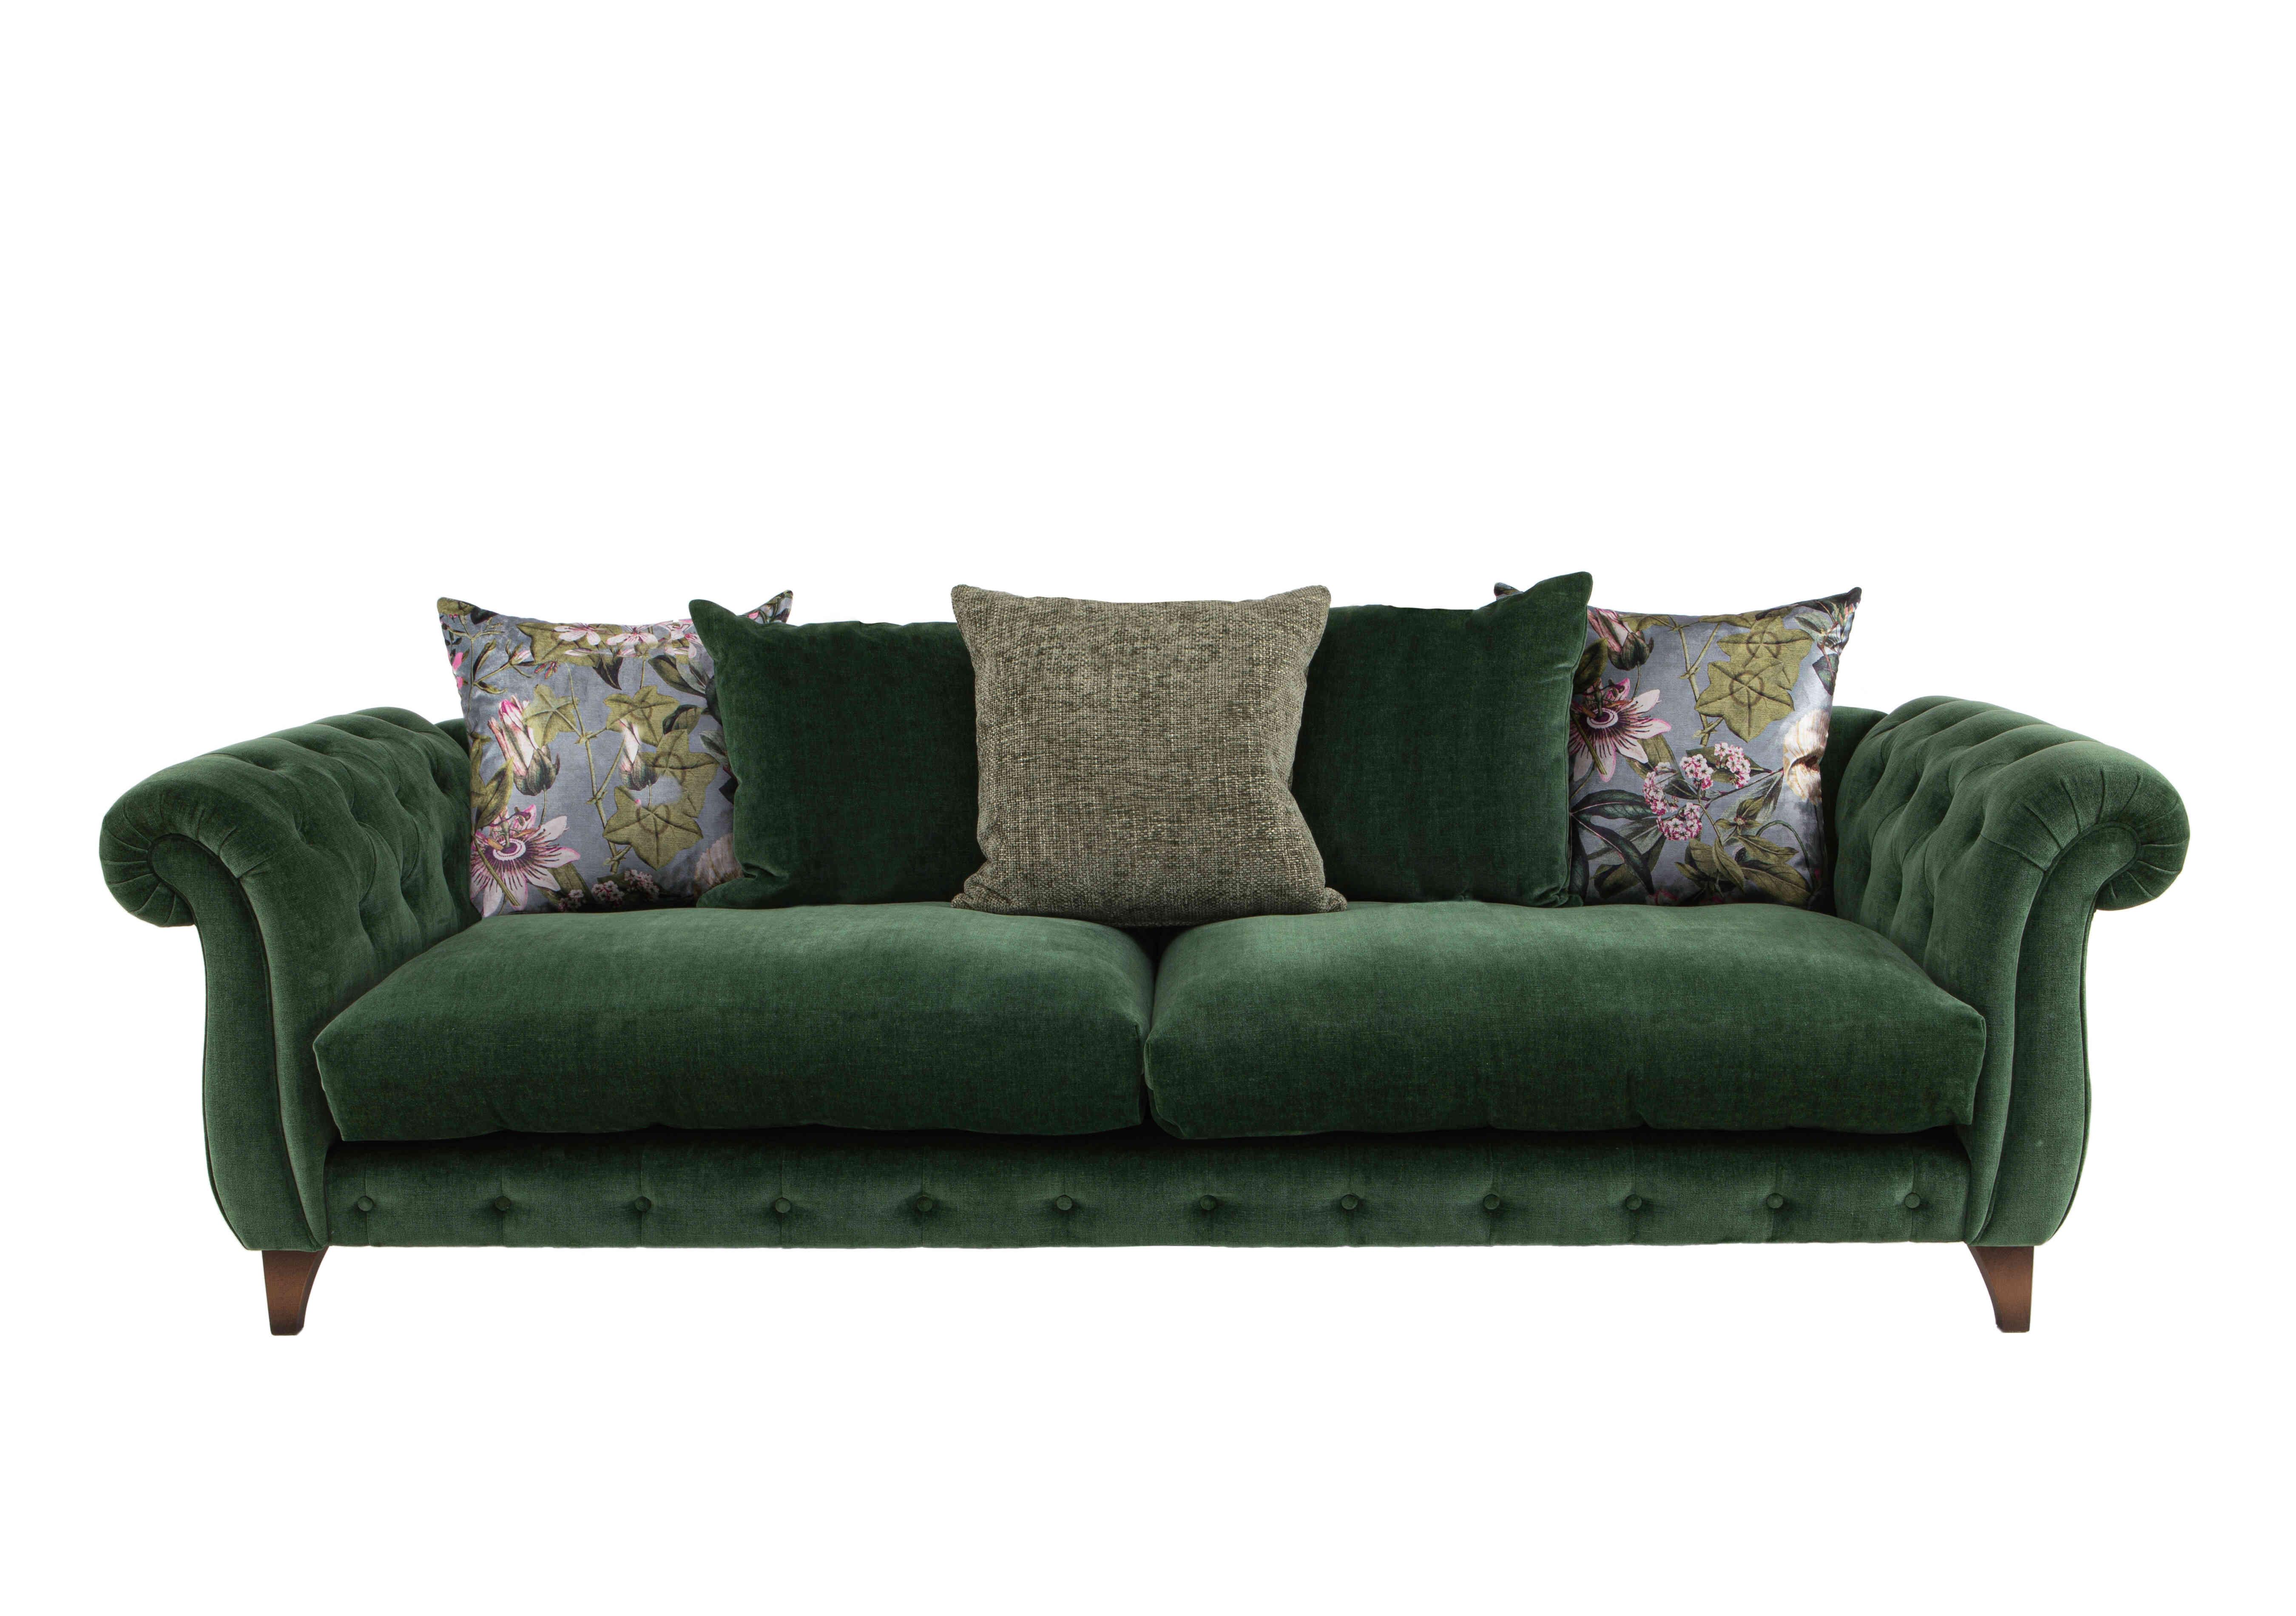 Boutique Palace Fabric 4 Seater Scatter Back Sofa in Oasis Parrot on Furniture Village